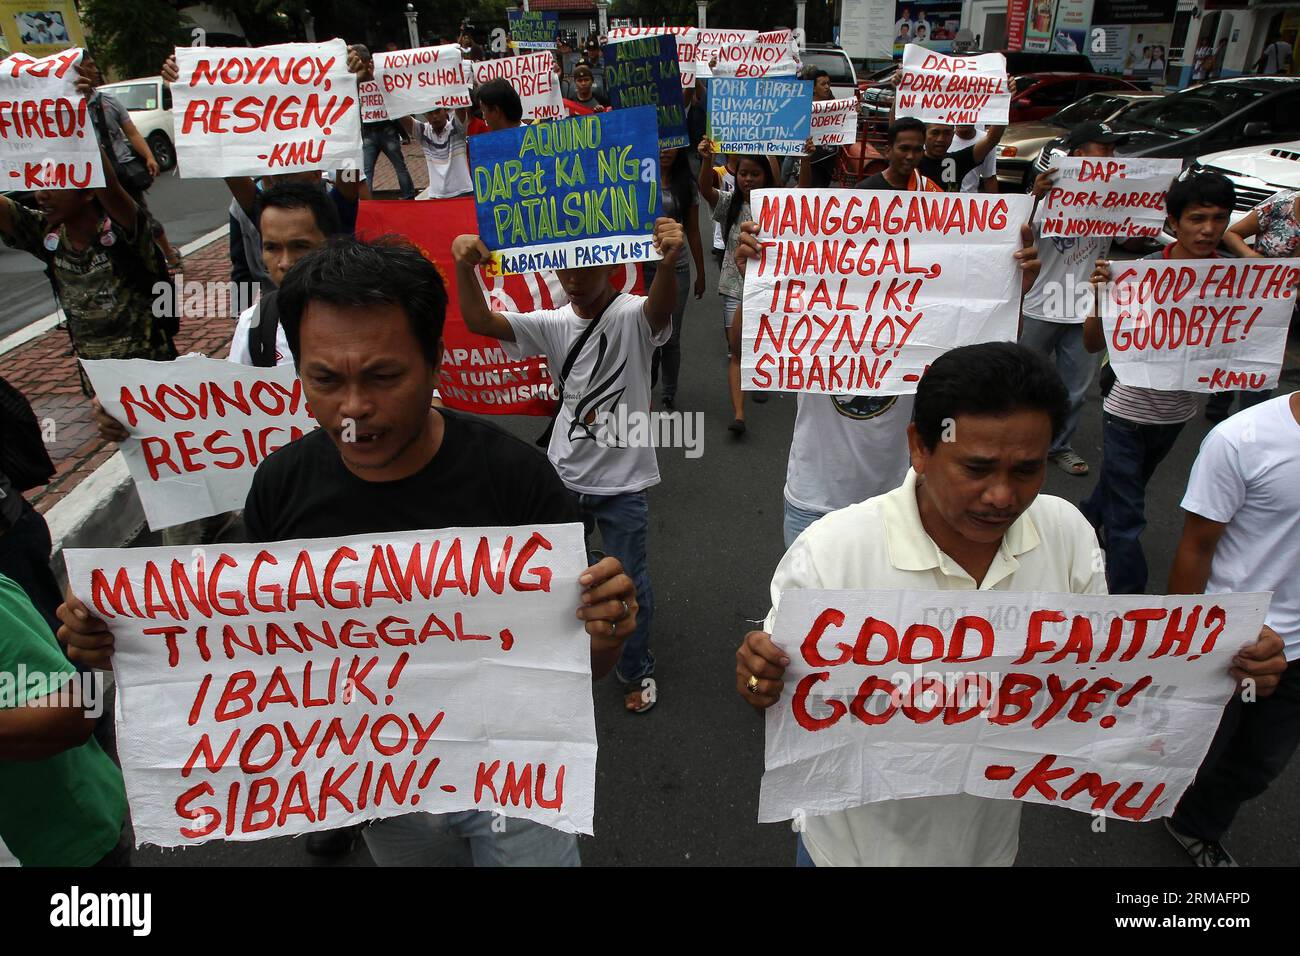 (140707) -- MANILA, July 7, 2014 (Xinhua) -- Activists hold placards as they call for President Aquino III to step down from office during a protest rally in Manila, the Philippines, July 7, 2014. A former government official on Monday filed another impeachment complaint against Philippine President Benigno Aquino III for bribery and violation of the Philippine Constitution. (Xinhua/Rouelle Umali) THE PHILIPPINES-MANILA-IMPEACHMENT COMPLAINT PUBLICATIONxNOTxINxCHN   Manila July 7 2014 XINHUA activists Hold placards As They Call for President Aquino III to Step Down from Office during a Protest Stock Photo